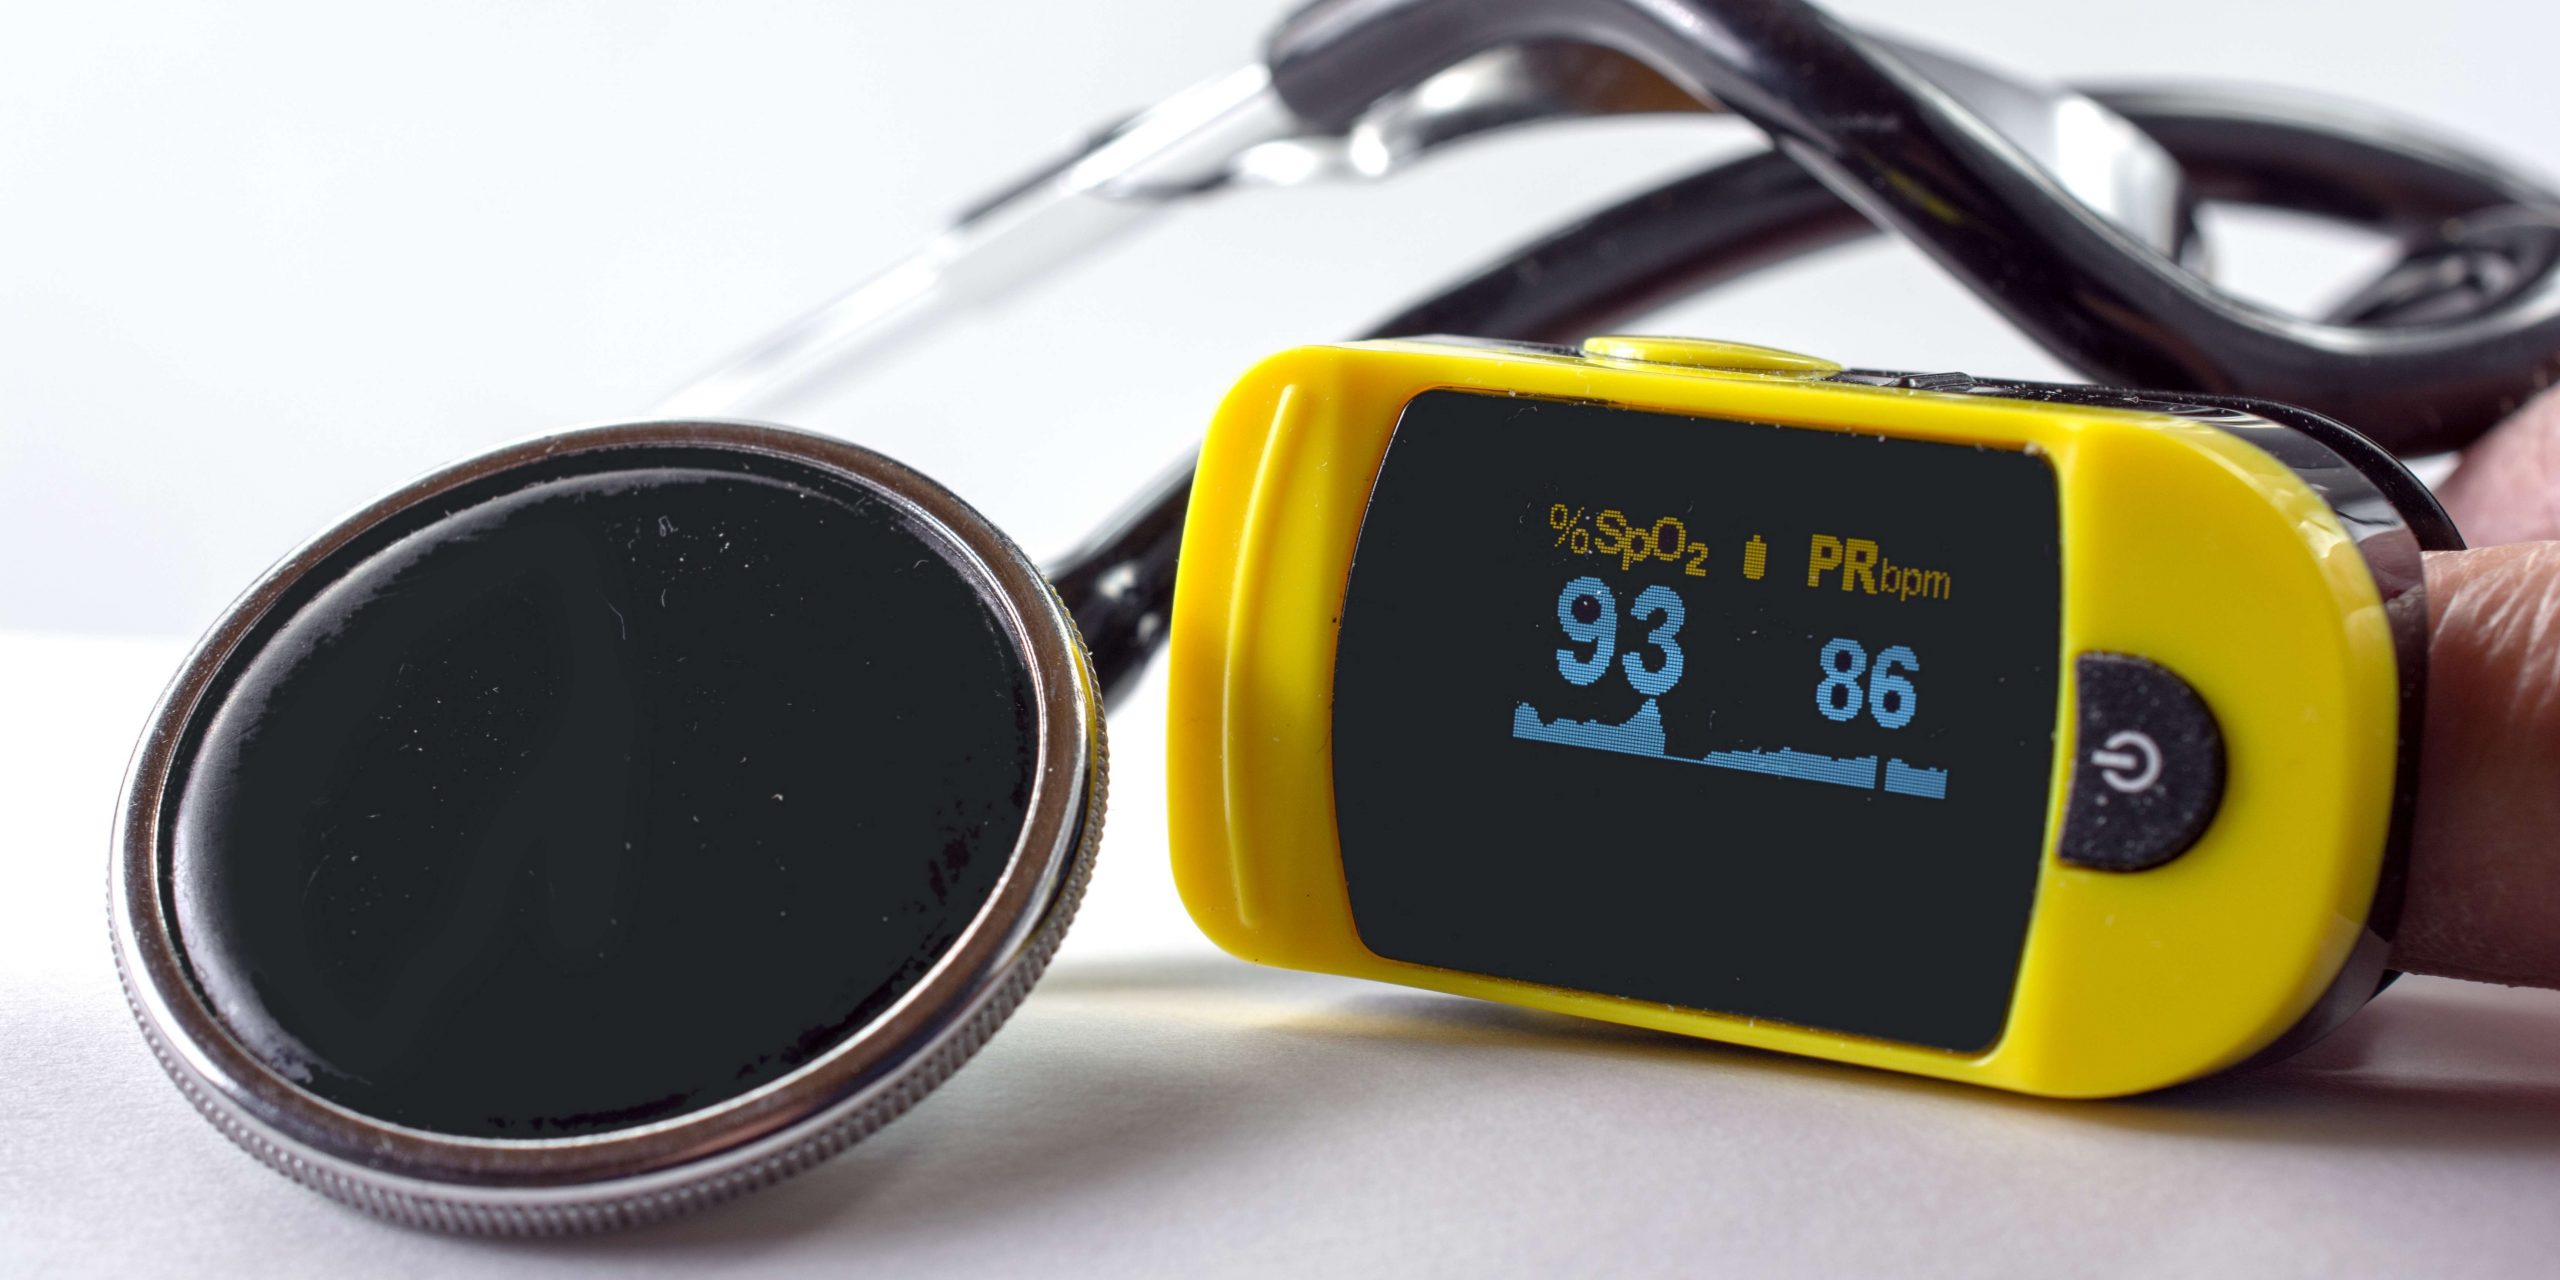 Monitoring Your Blood Oxygen Levels With a Pulse Oximeter